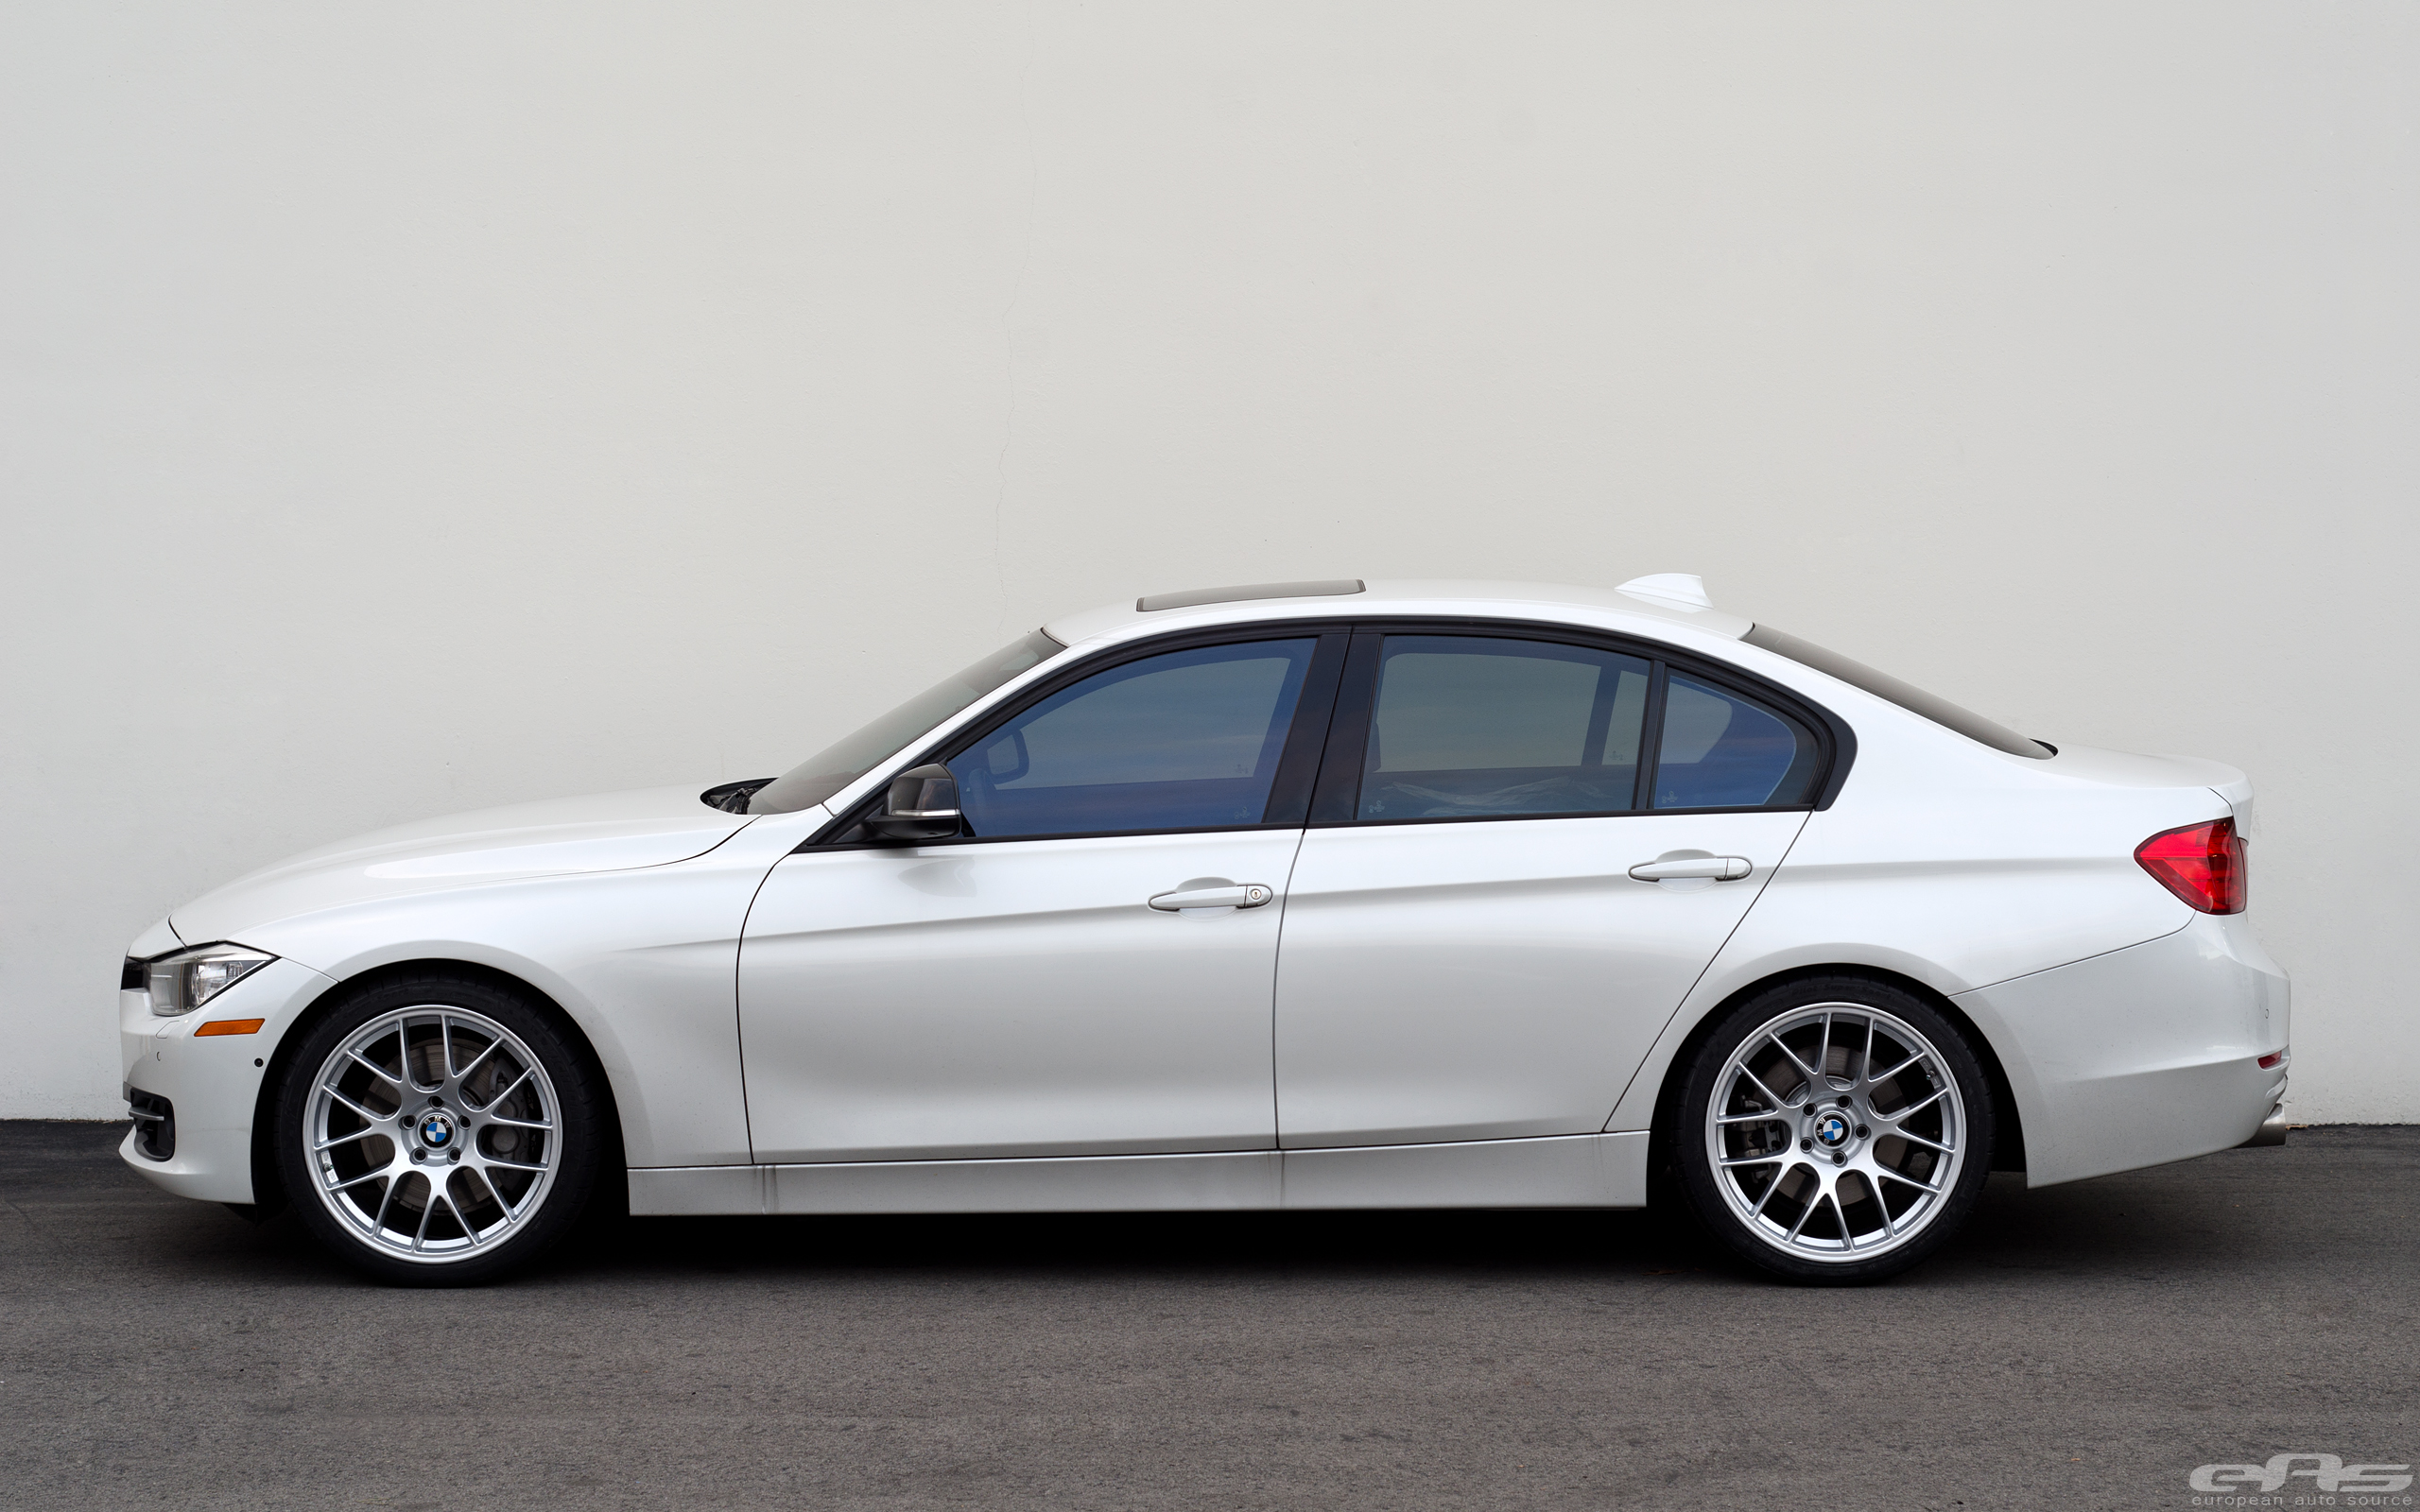 Mineral White BMW F30 3 Series Gets A Set Of Wheels